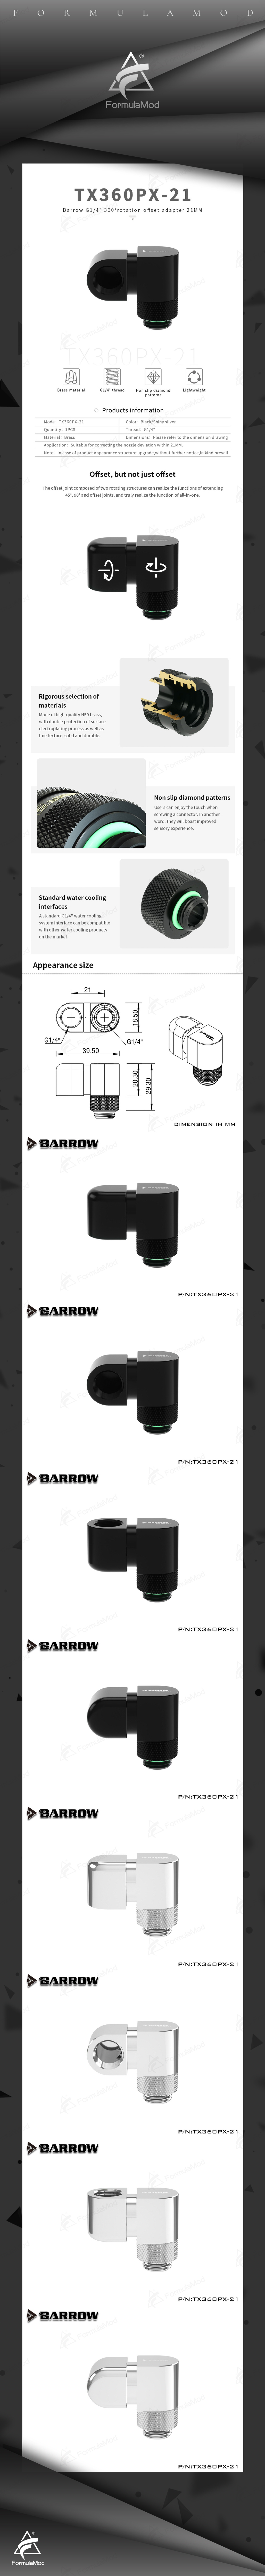 Barrow 360 Rotation Offset Fitting With 21mm, G1/4" Rotary 21mm Offset Adapter, For Water Cooling Port/Tube Fine-tuning Offset, TX360PX-21  